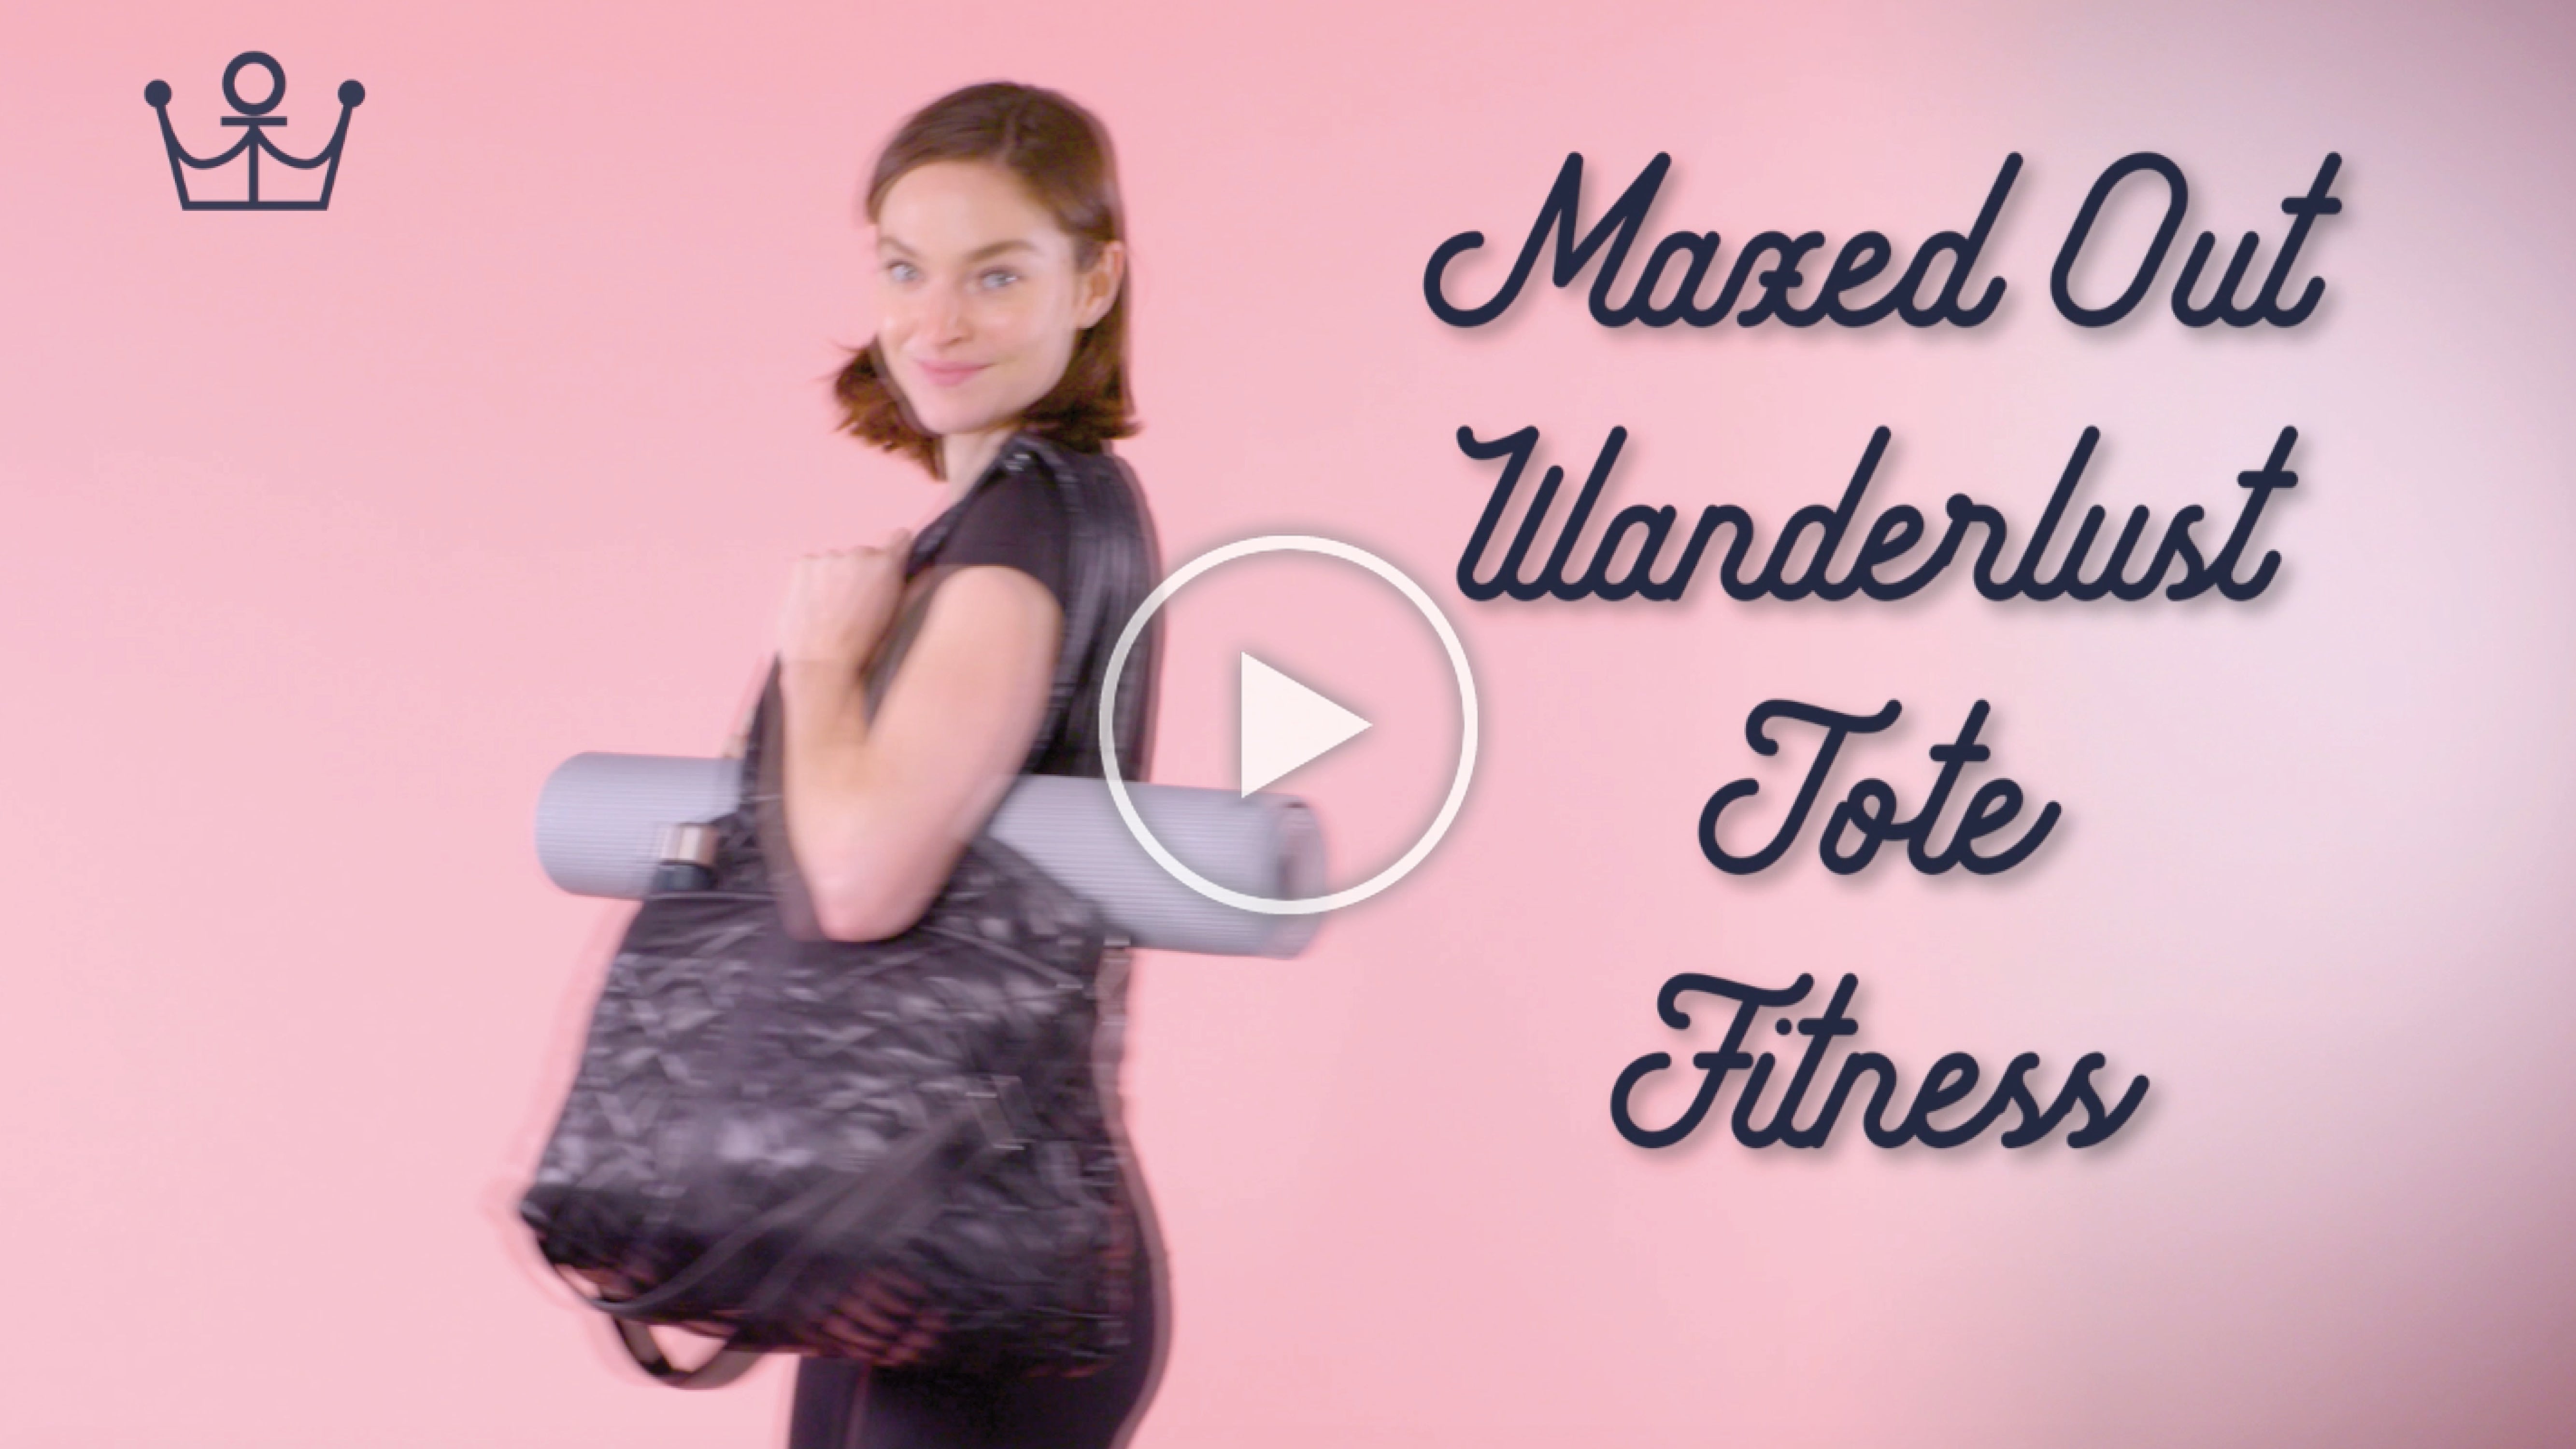 Video of Maxed Out Wanderlust Tote - Fitness